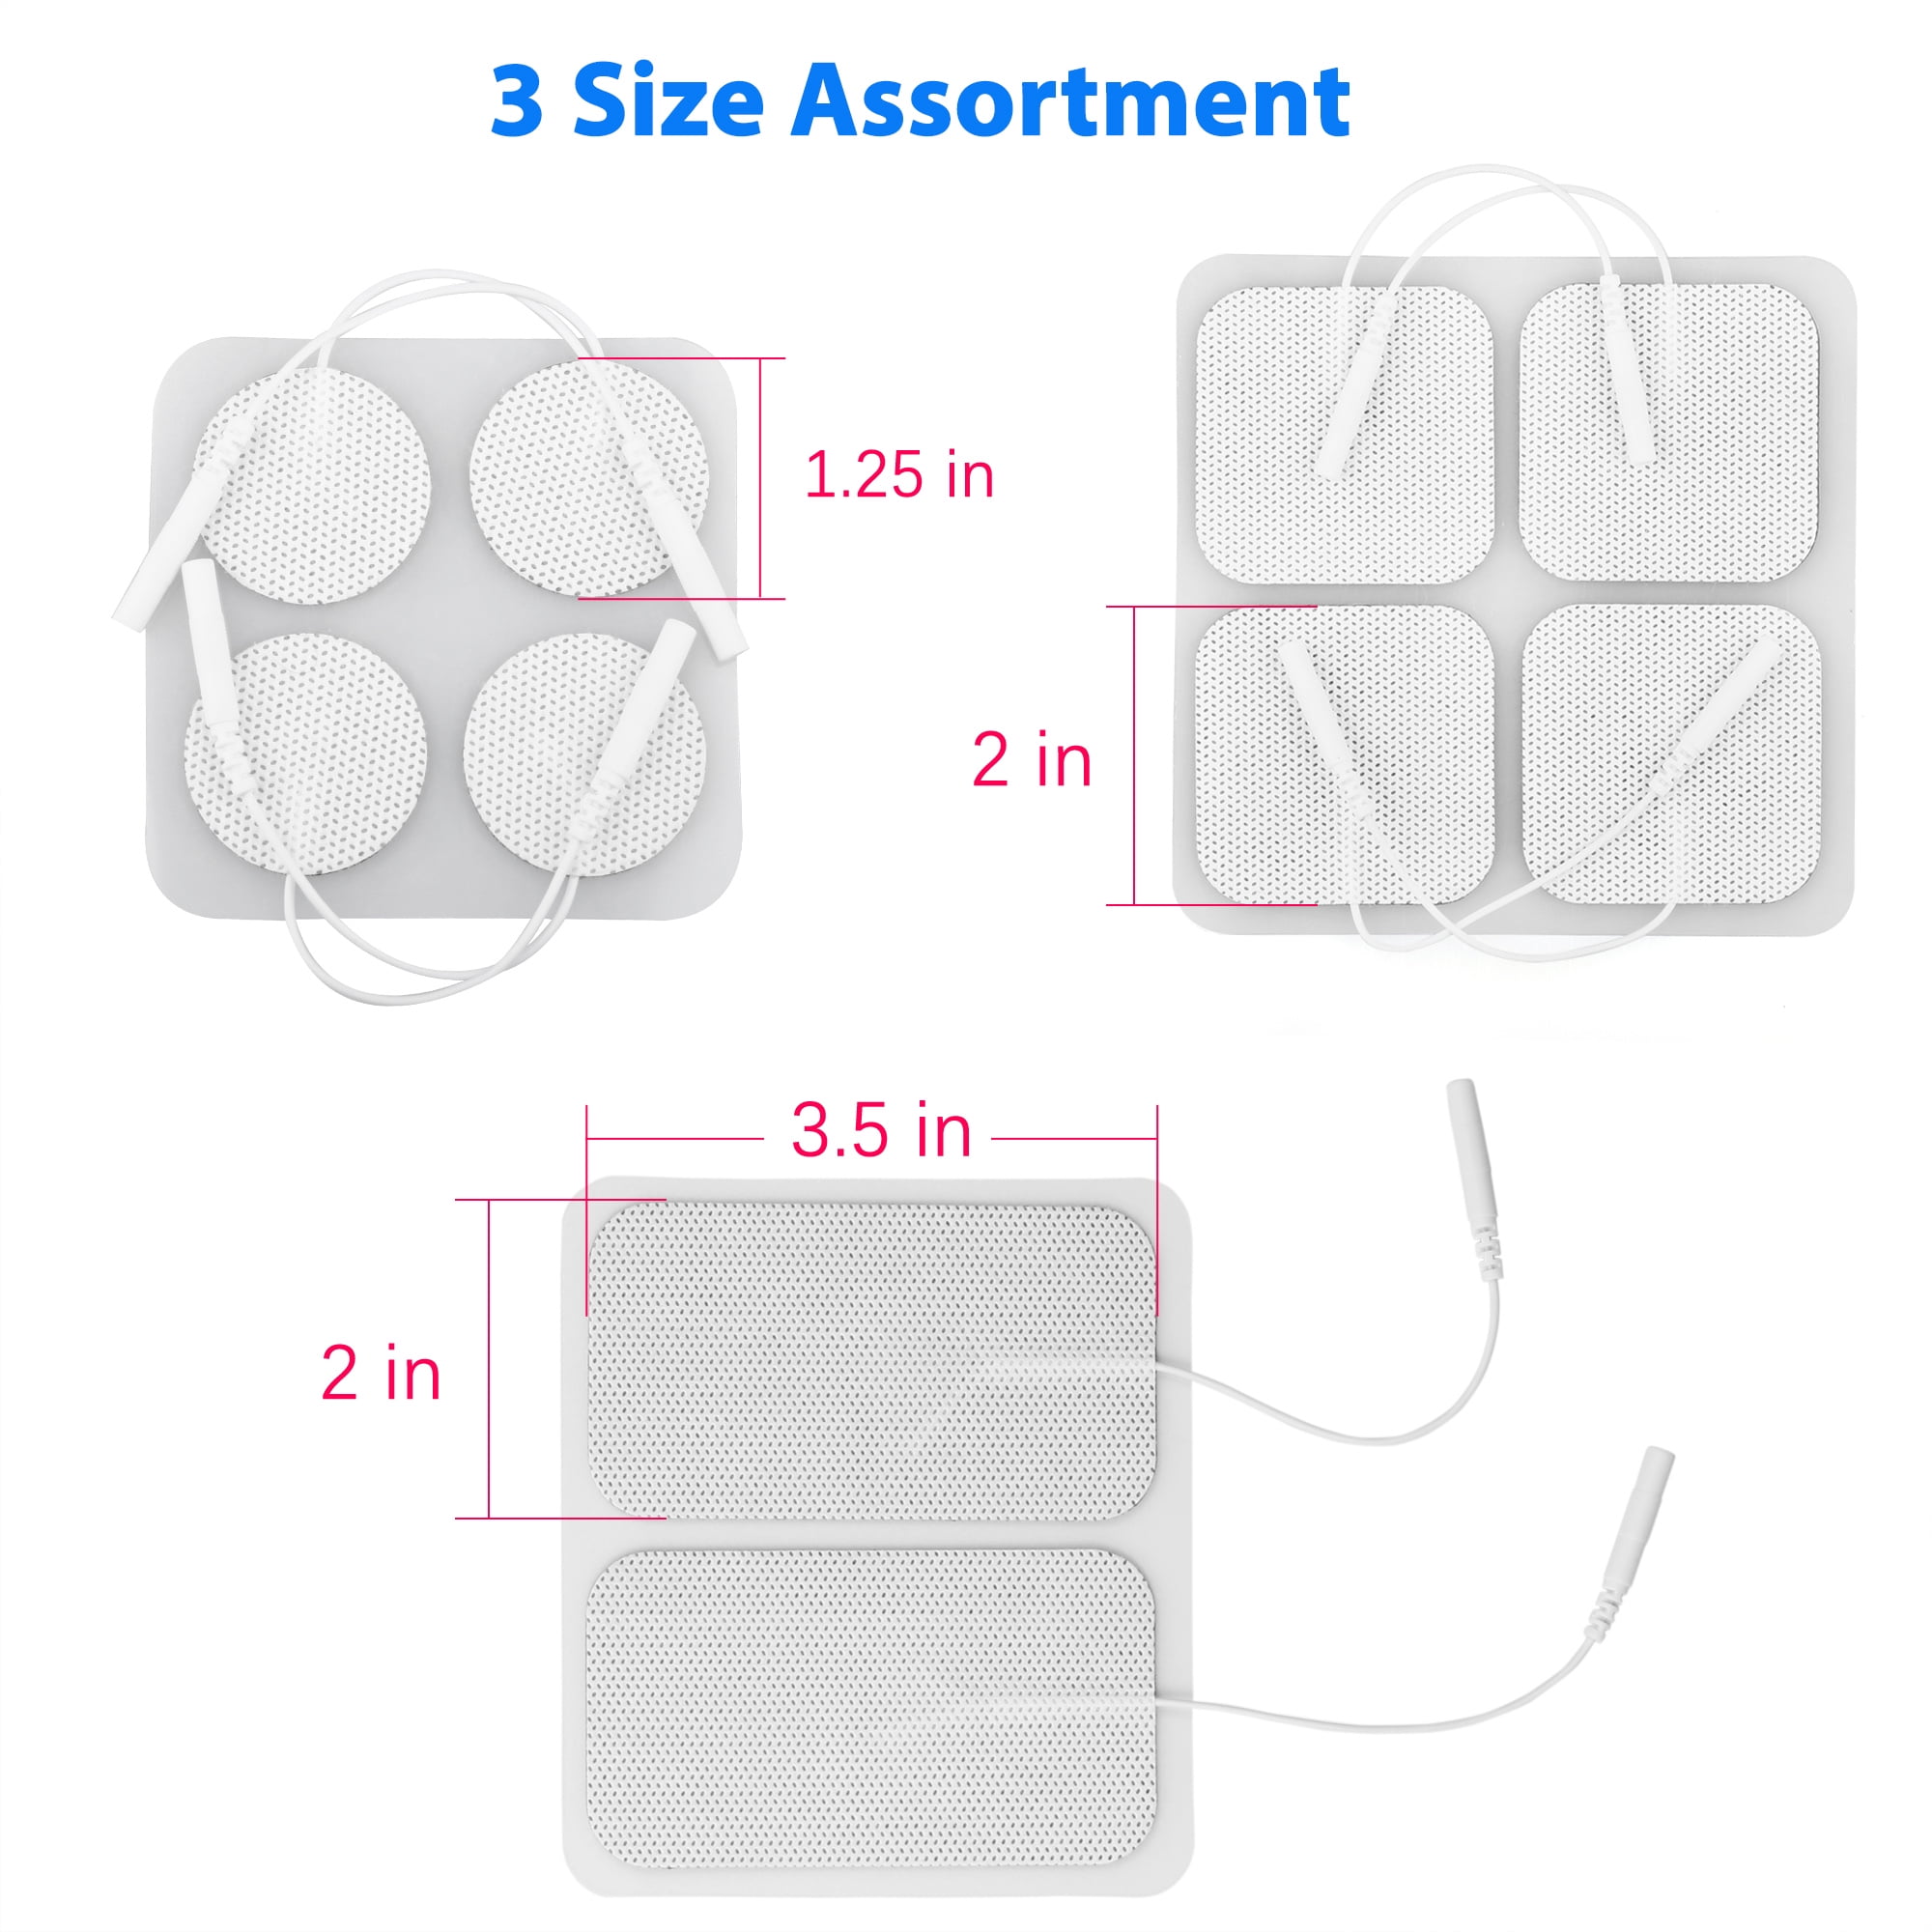 20pcs TENS Unit Replacement Pads 2X2, Latex Free Electrodes Compatible With TENS  Machine Use 2mm Pin Connector Lead Wires Such As AUVON TENS, TENS 7000,  Etekcity, Nicwell Care Tens